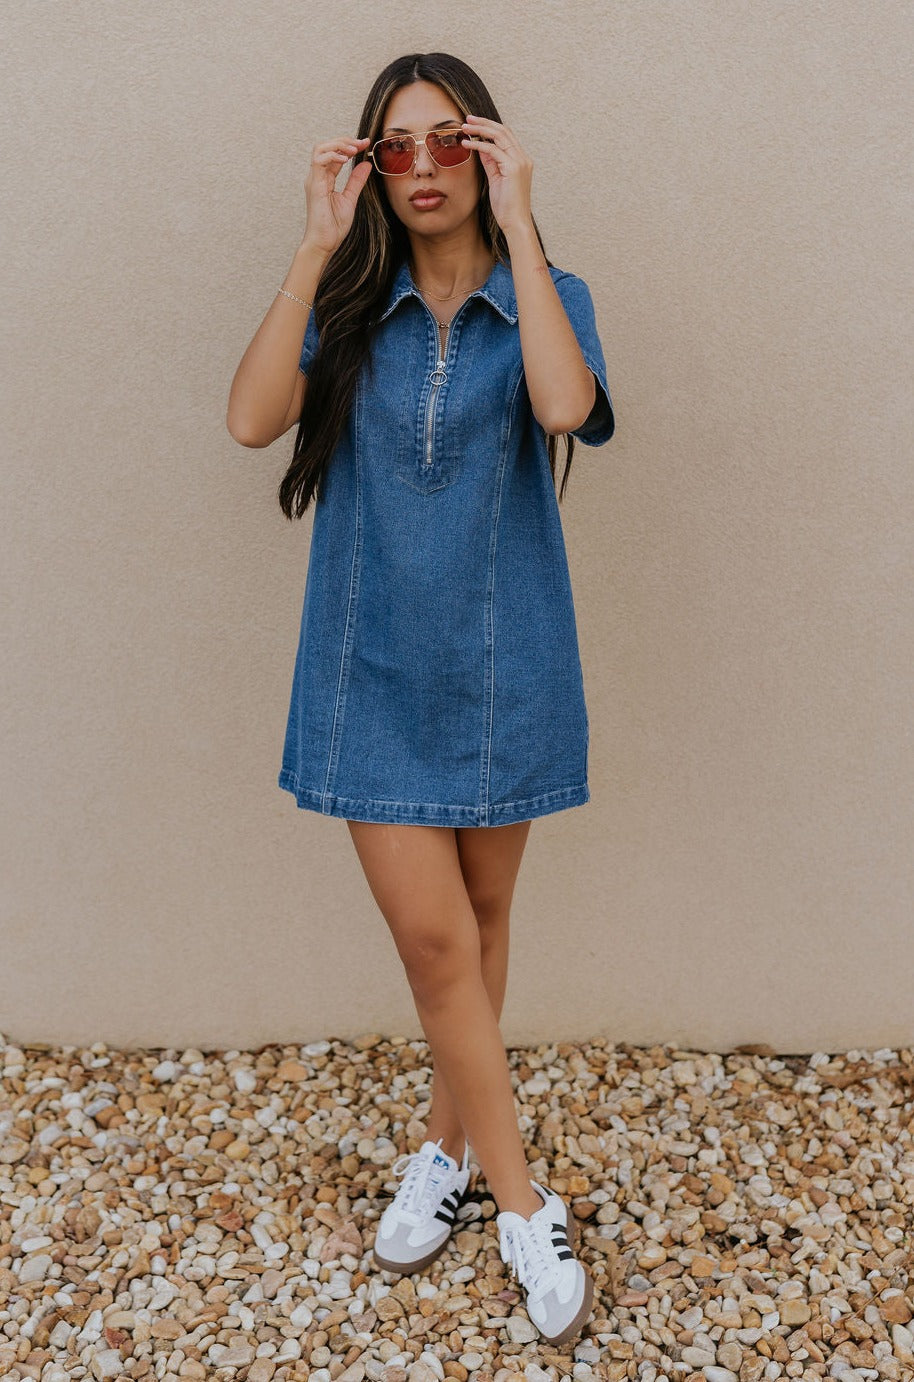 Full body front view of model wearing the Jada Denim Short Sleeve Mini Dress that has dark wash denim fabric, a zippered neckline with a collar, and short sleeves.